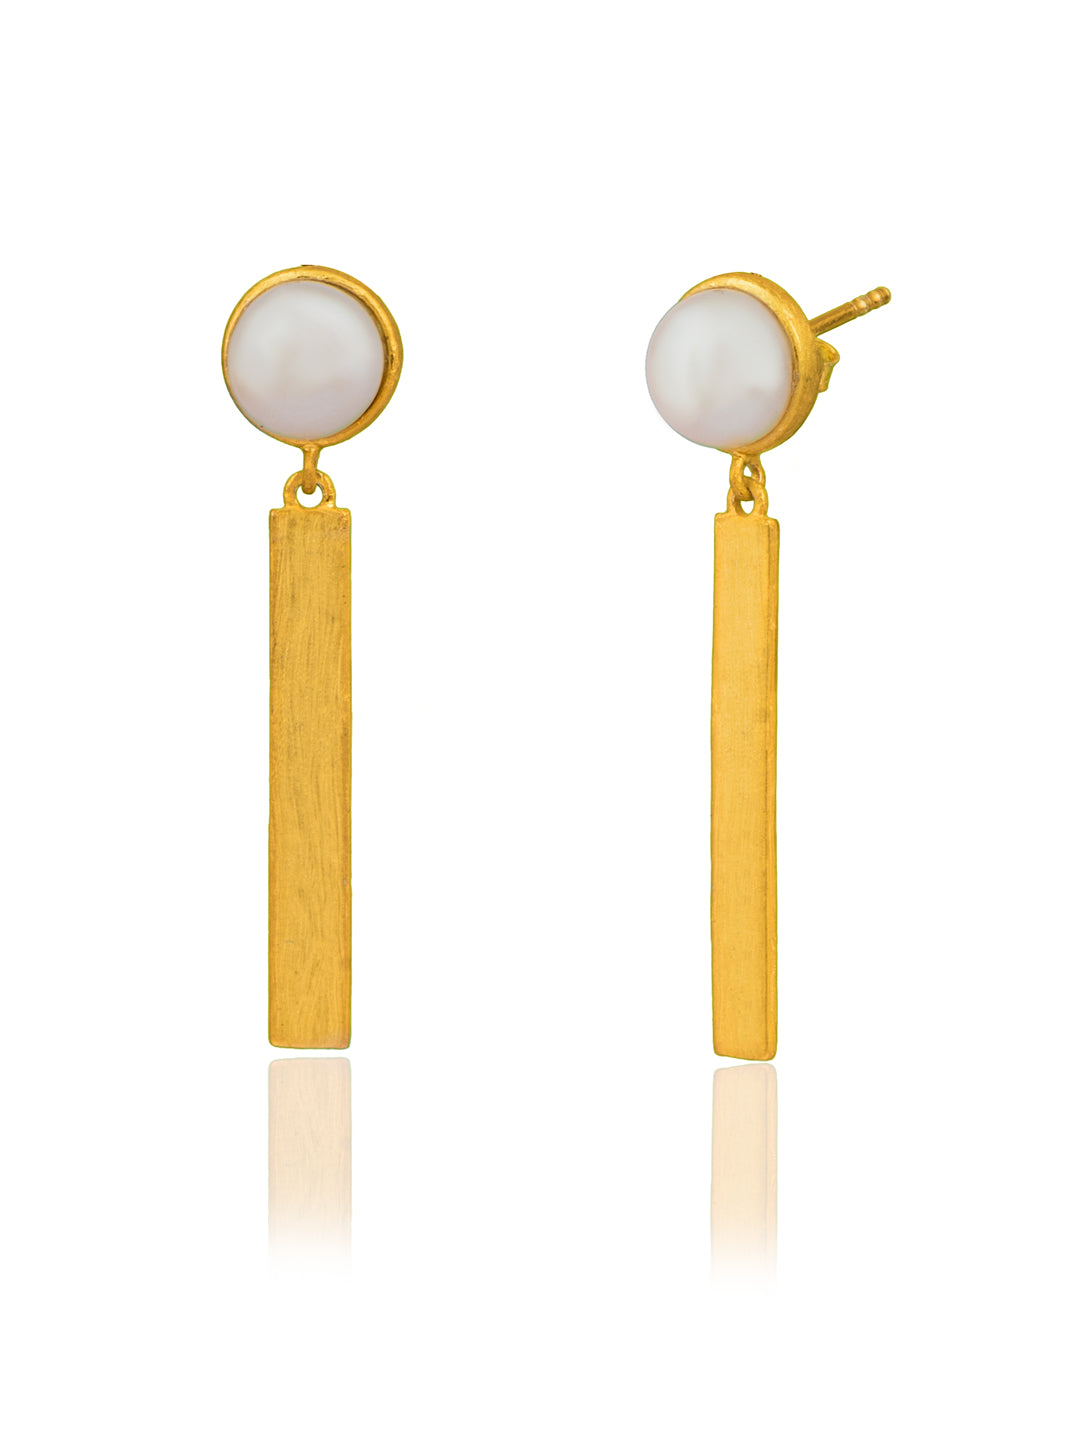 Pearl Gold Plated Lightweight Earrings